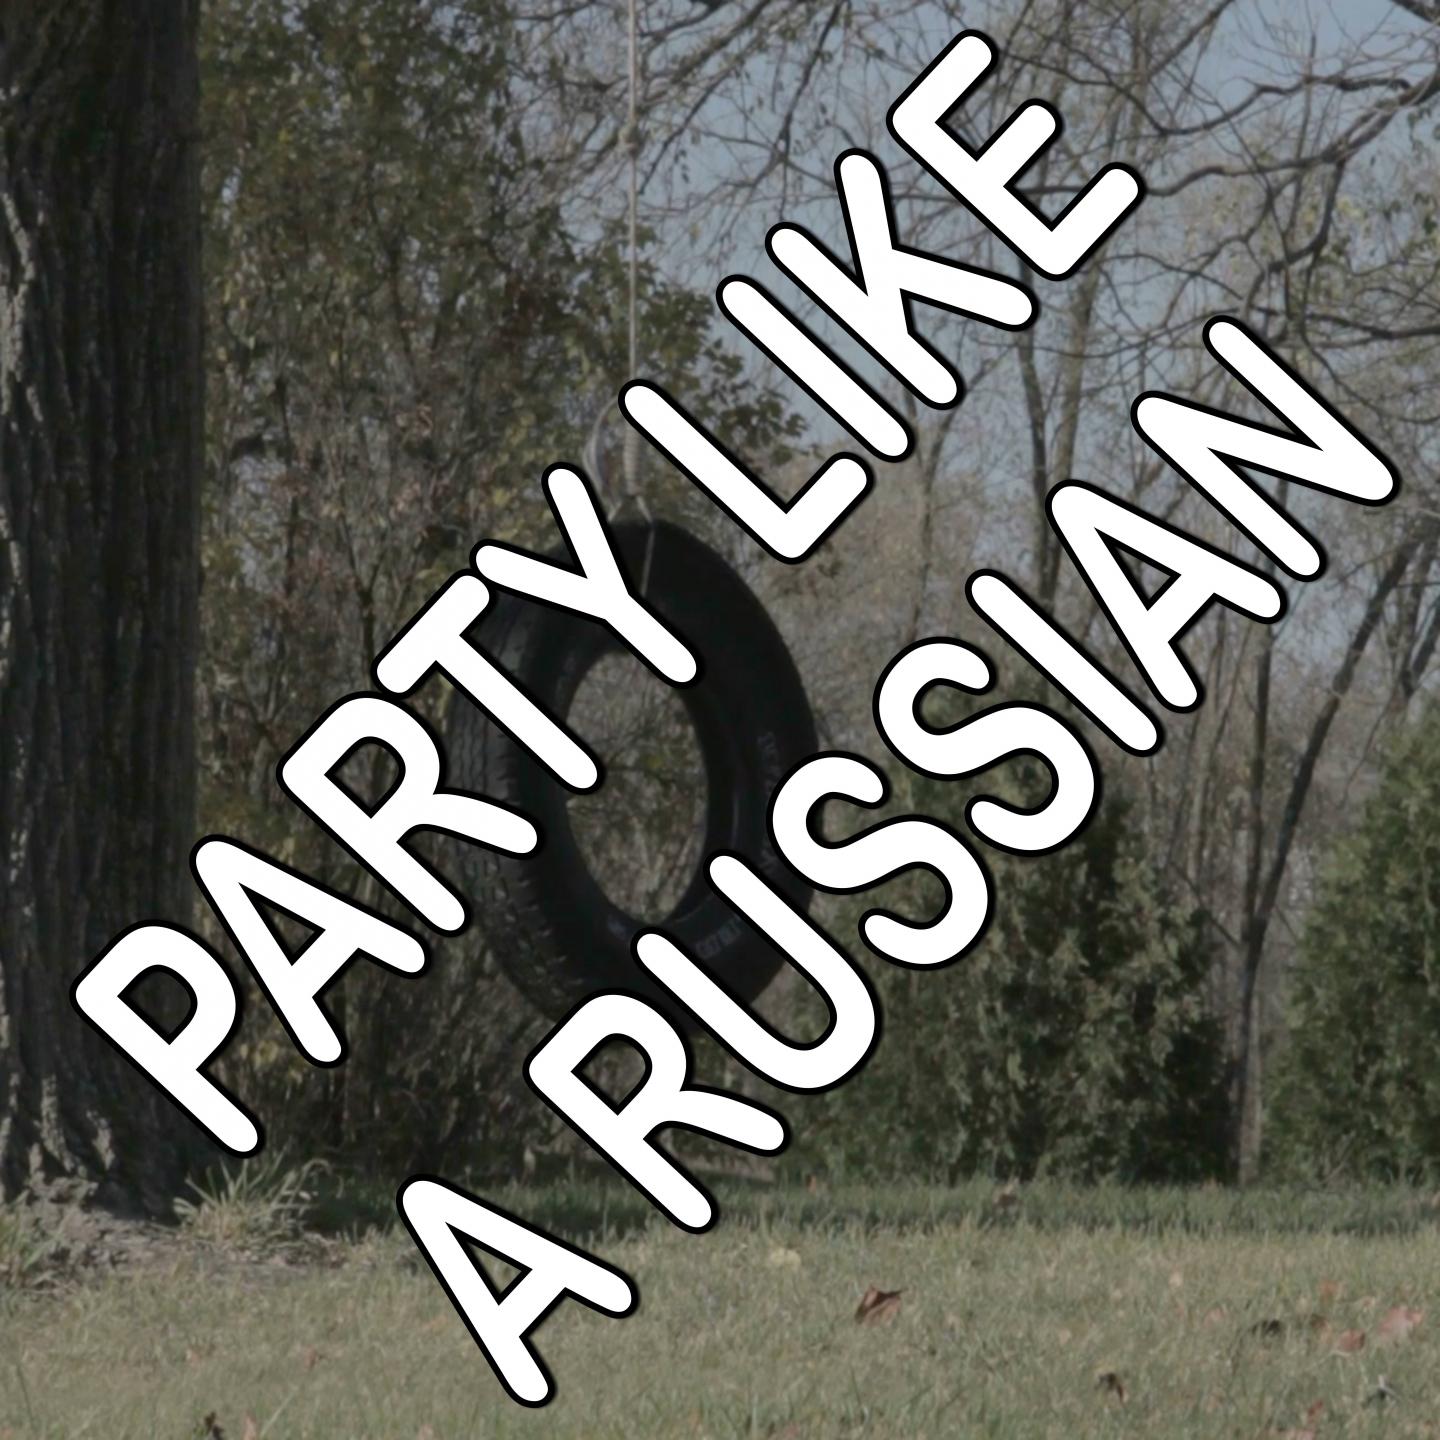 Party Like a Russian - Tribute to Robbie Williams